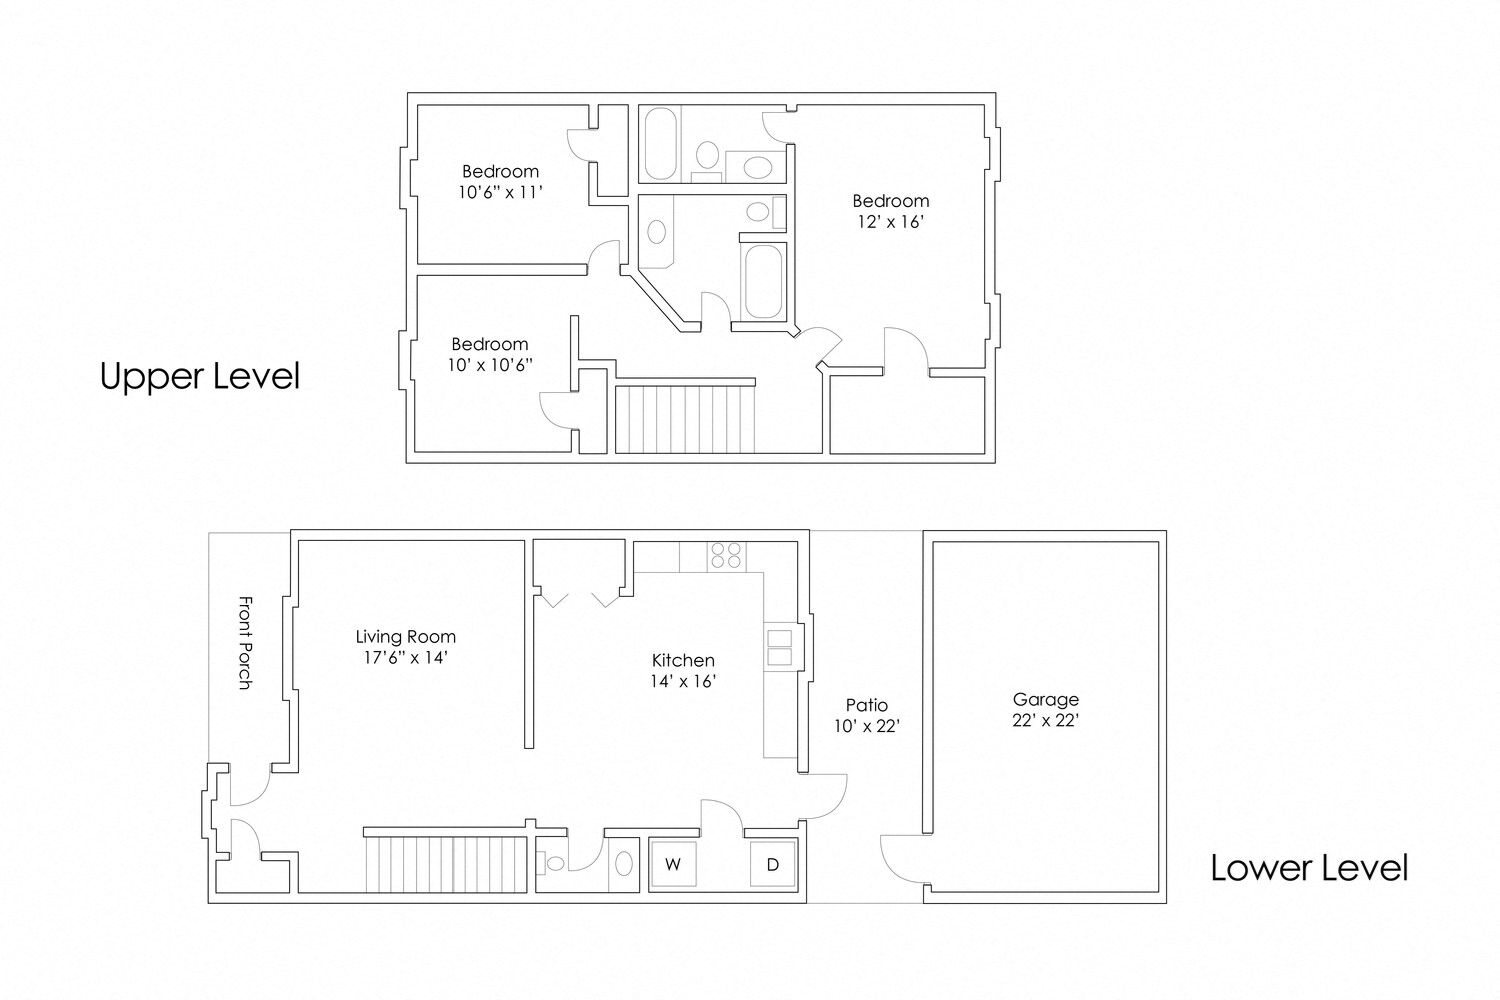 Floor Plans of The Gables Townhomes in Sioux Falls, SD